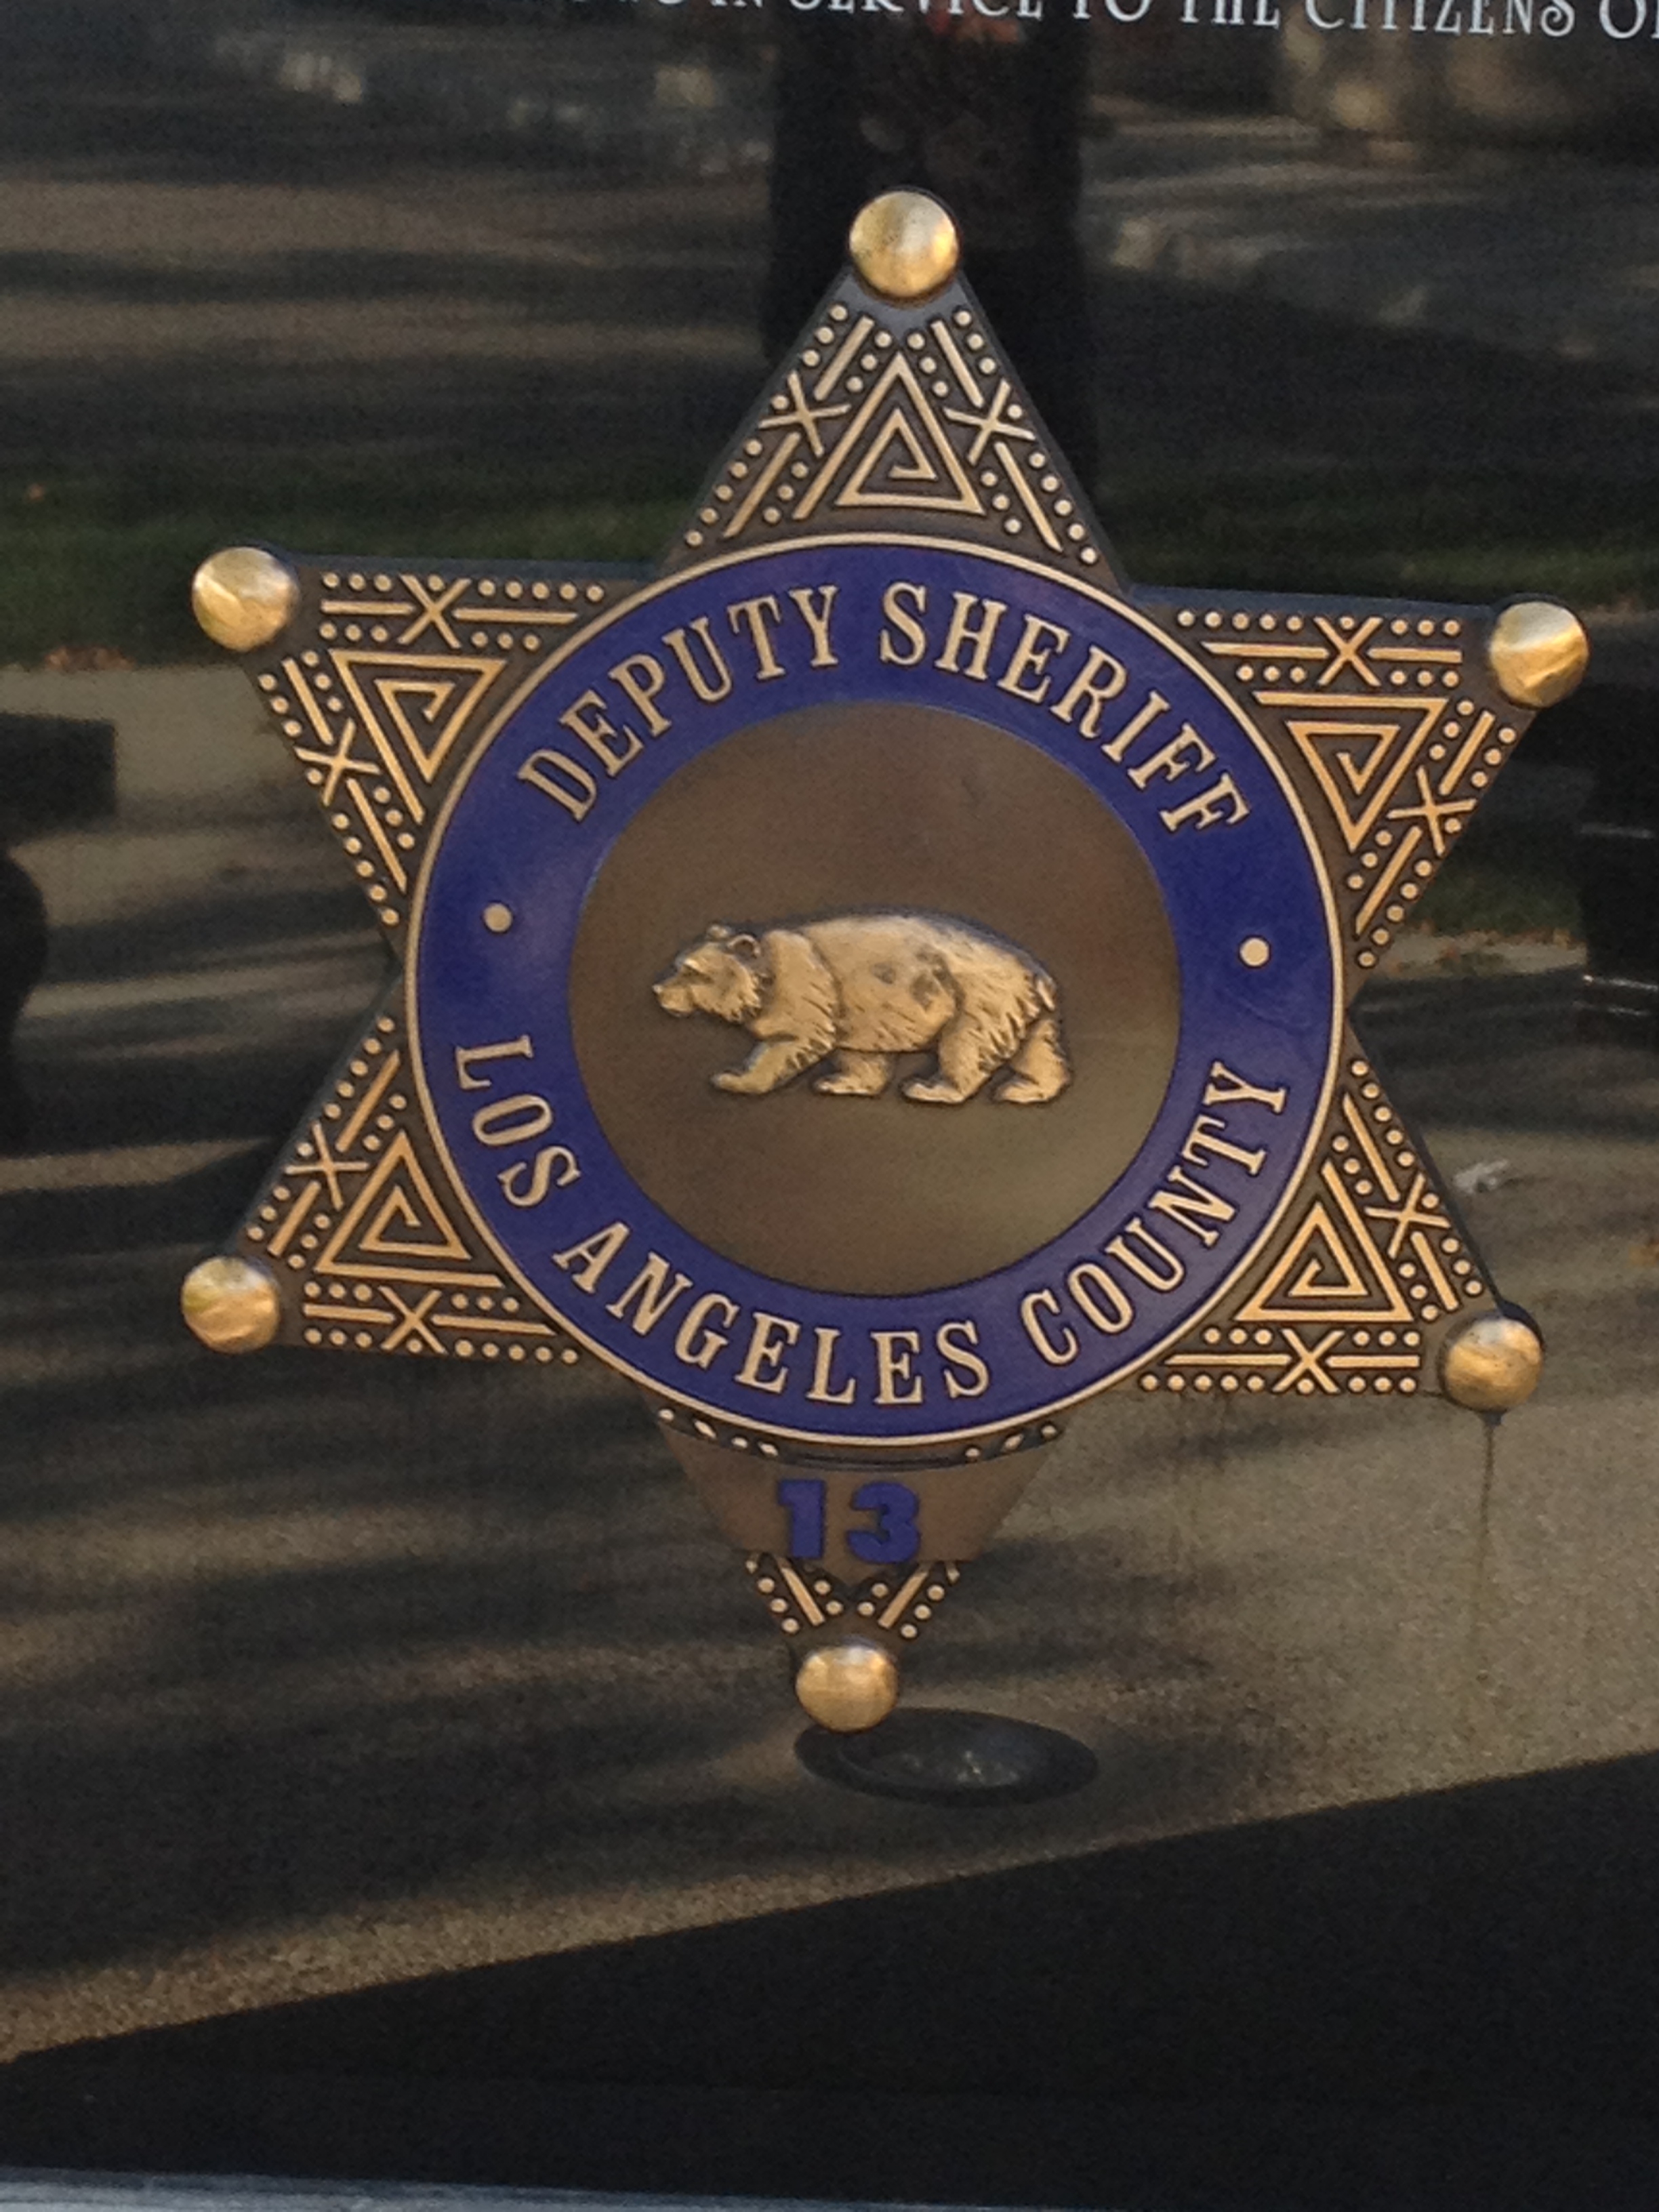 Homicide Rate Drops in Los Angeles County